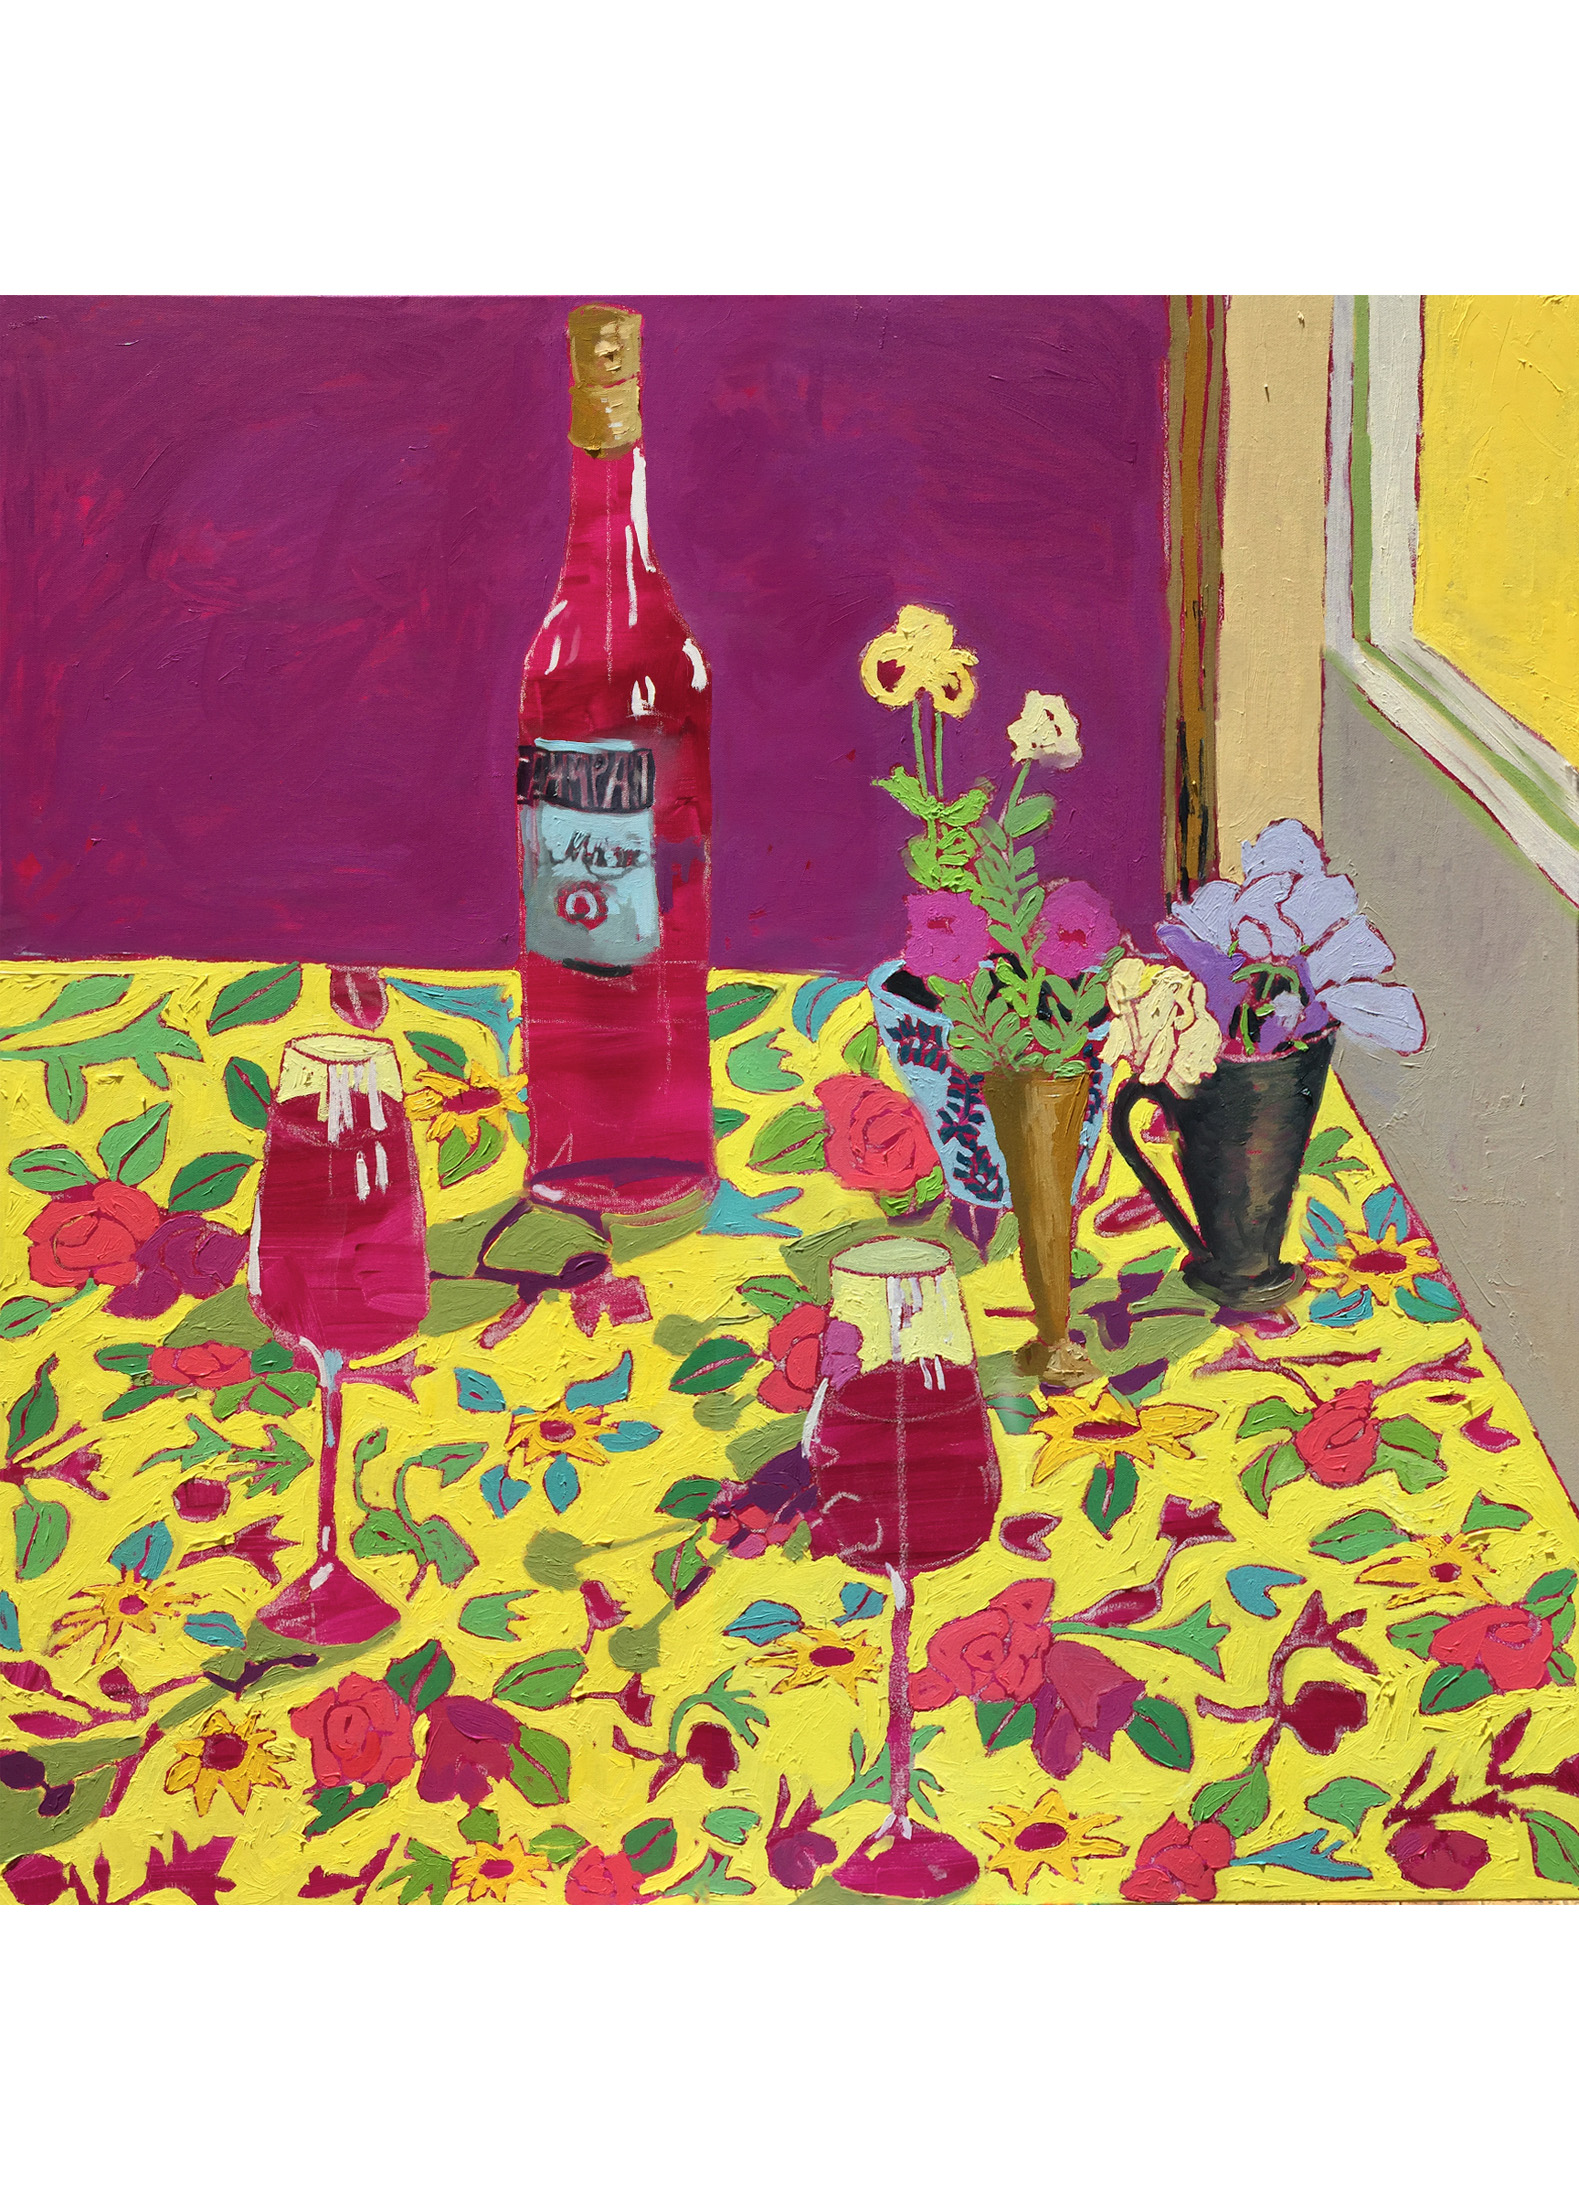 A painting by Jane Mitchell, two glasses, a Campari bottle and two vases on a floral table cloth.